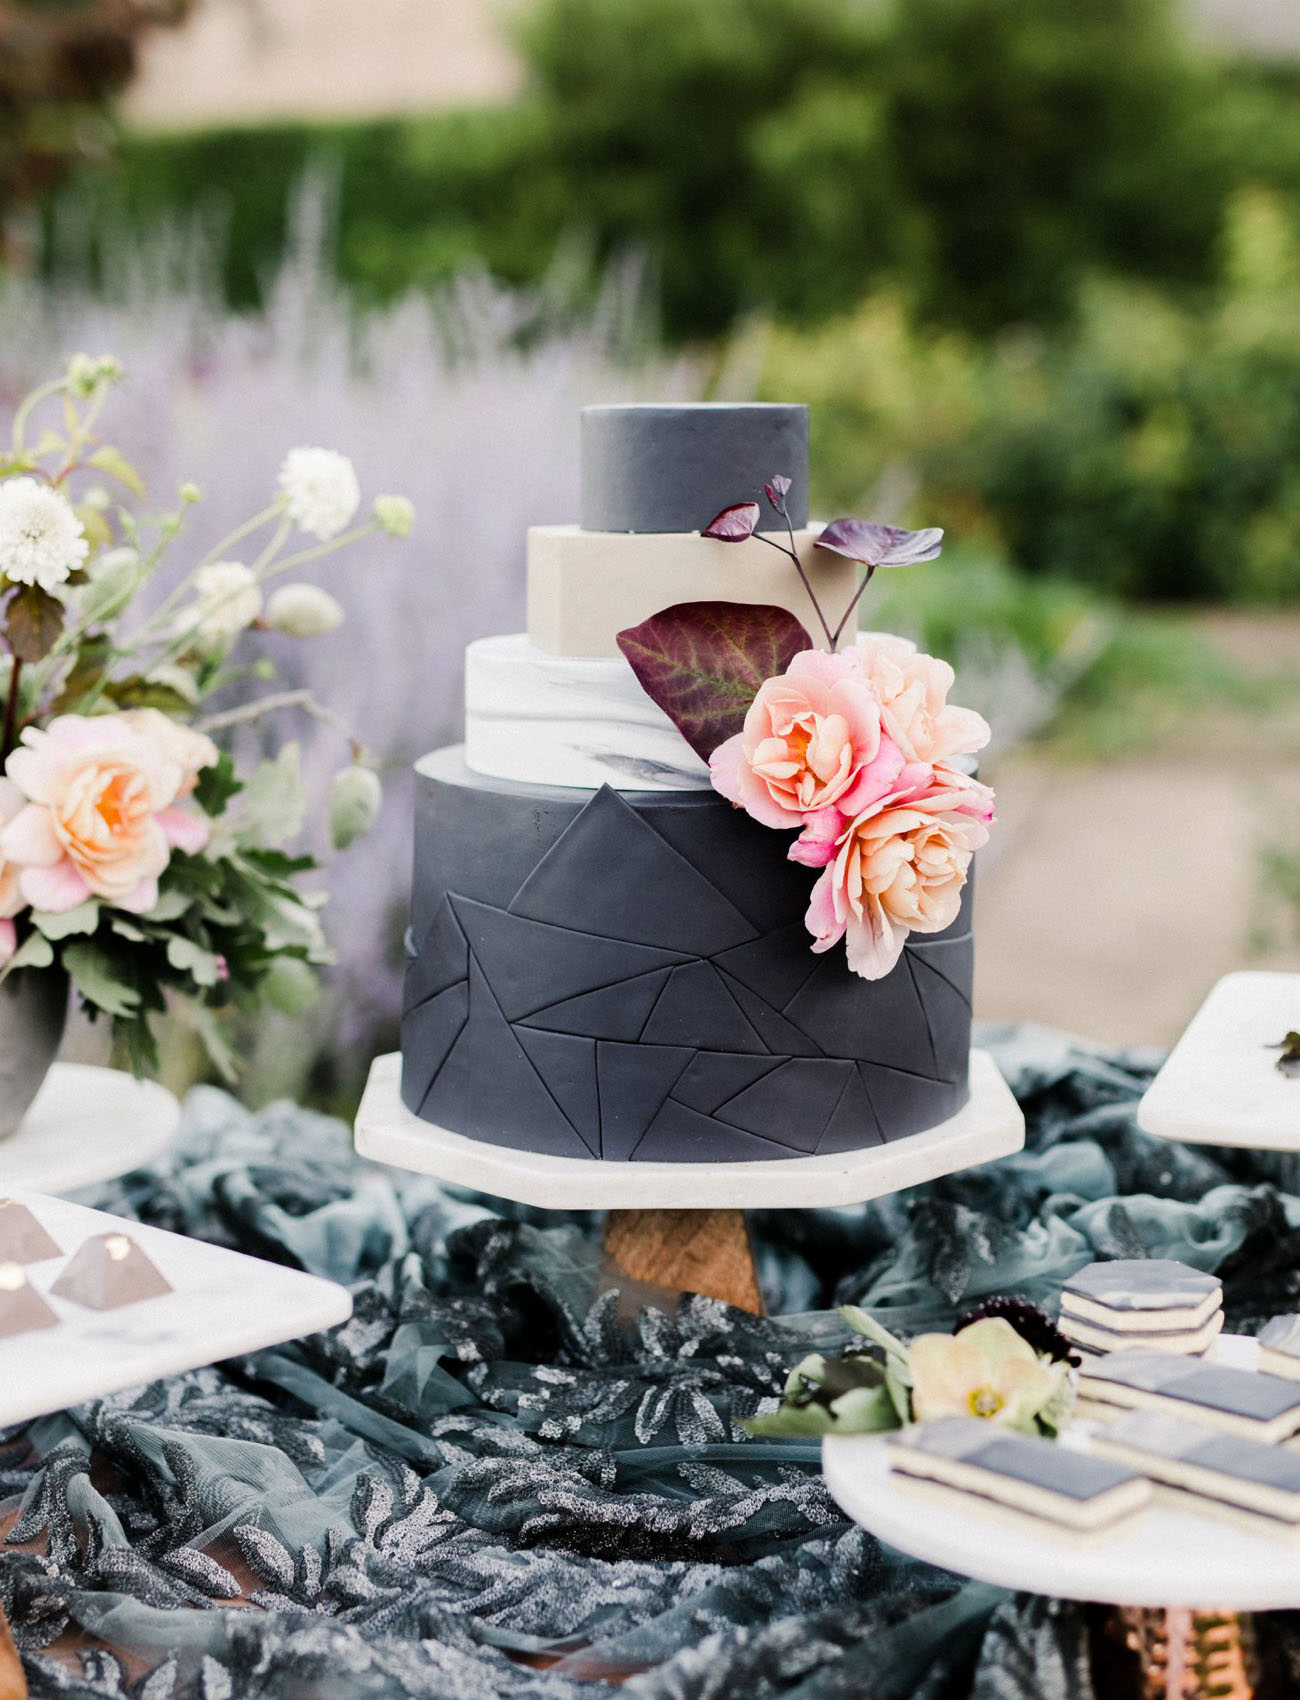 A gorgeous geometric wedding cake in matte black and white with pastel blooms